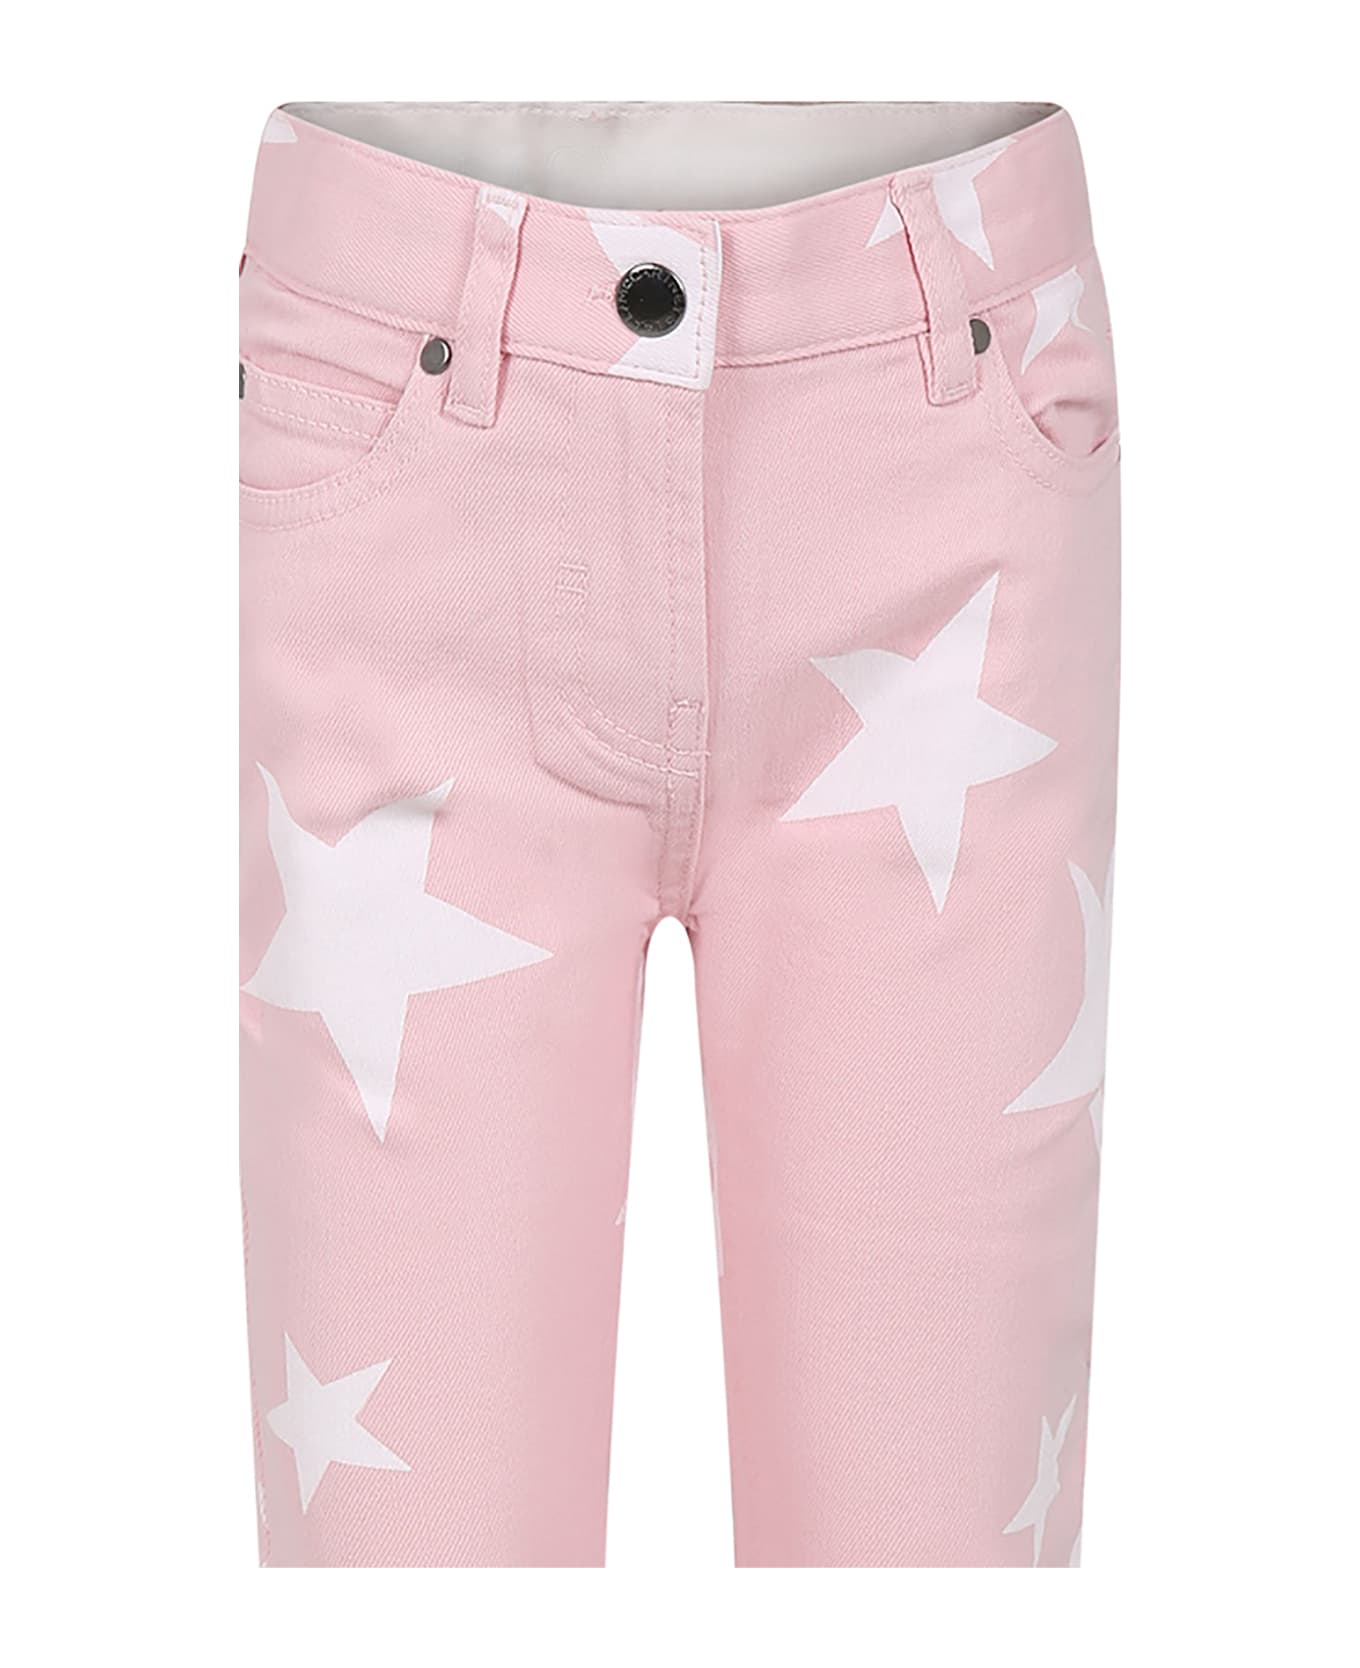 Stella McCartney Kids Pink Jeans For Girl With Stars And Logo - Pink ボトムス